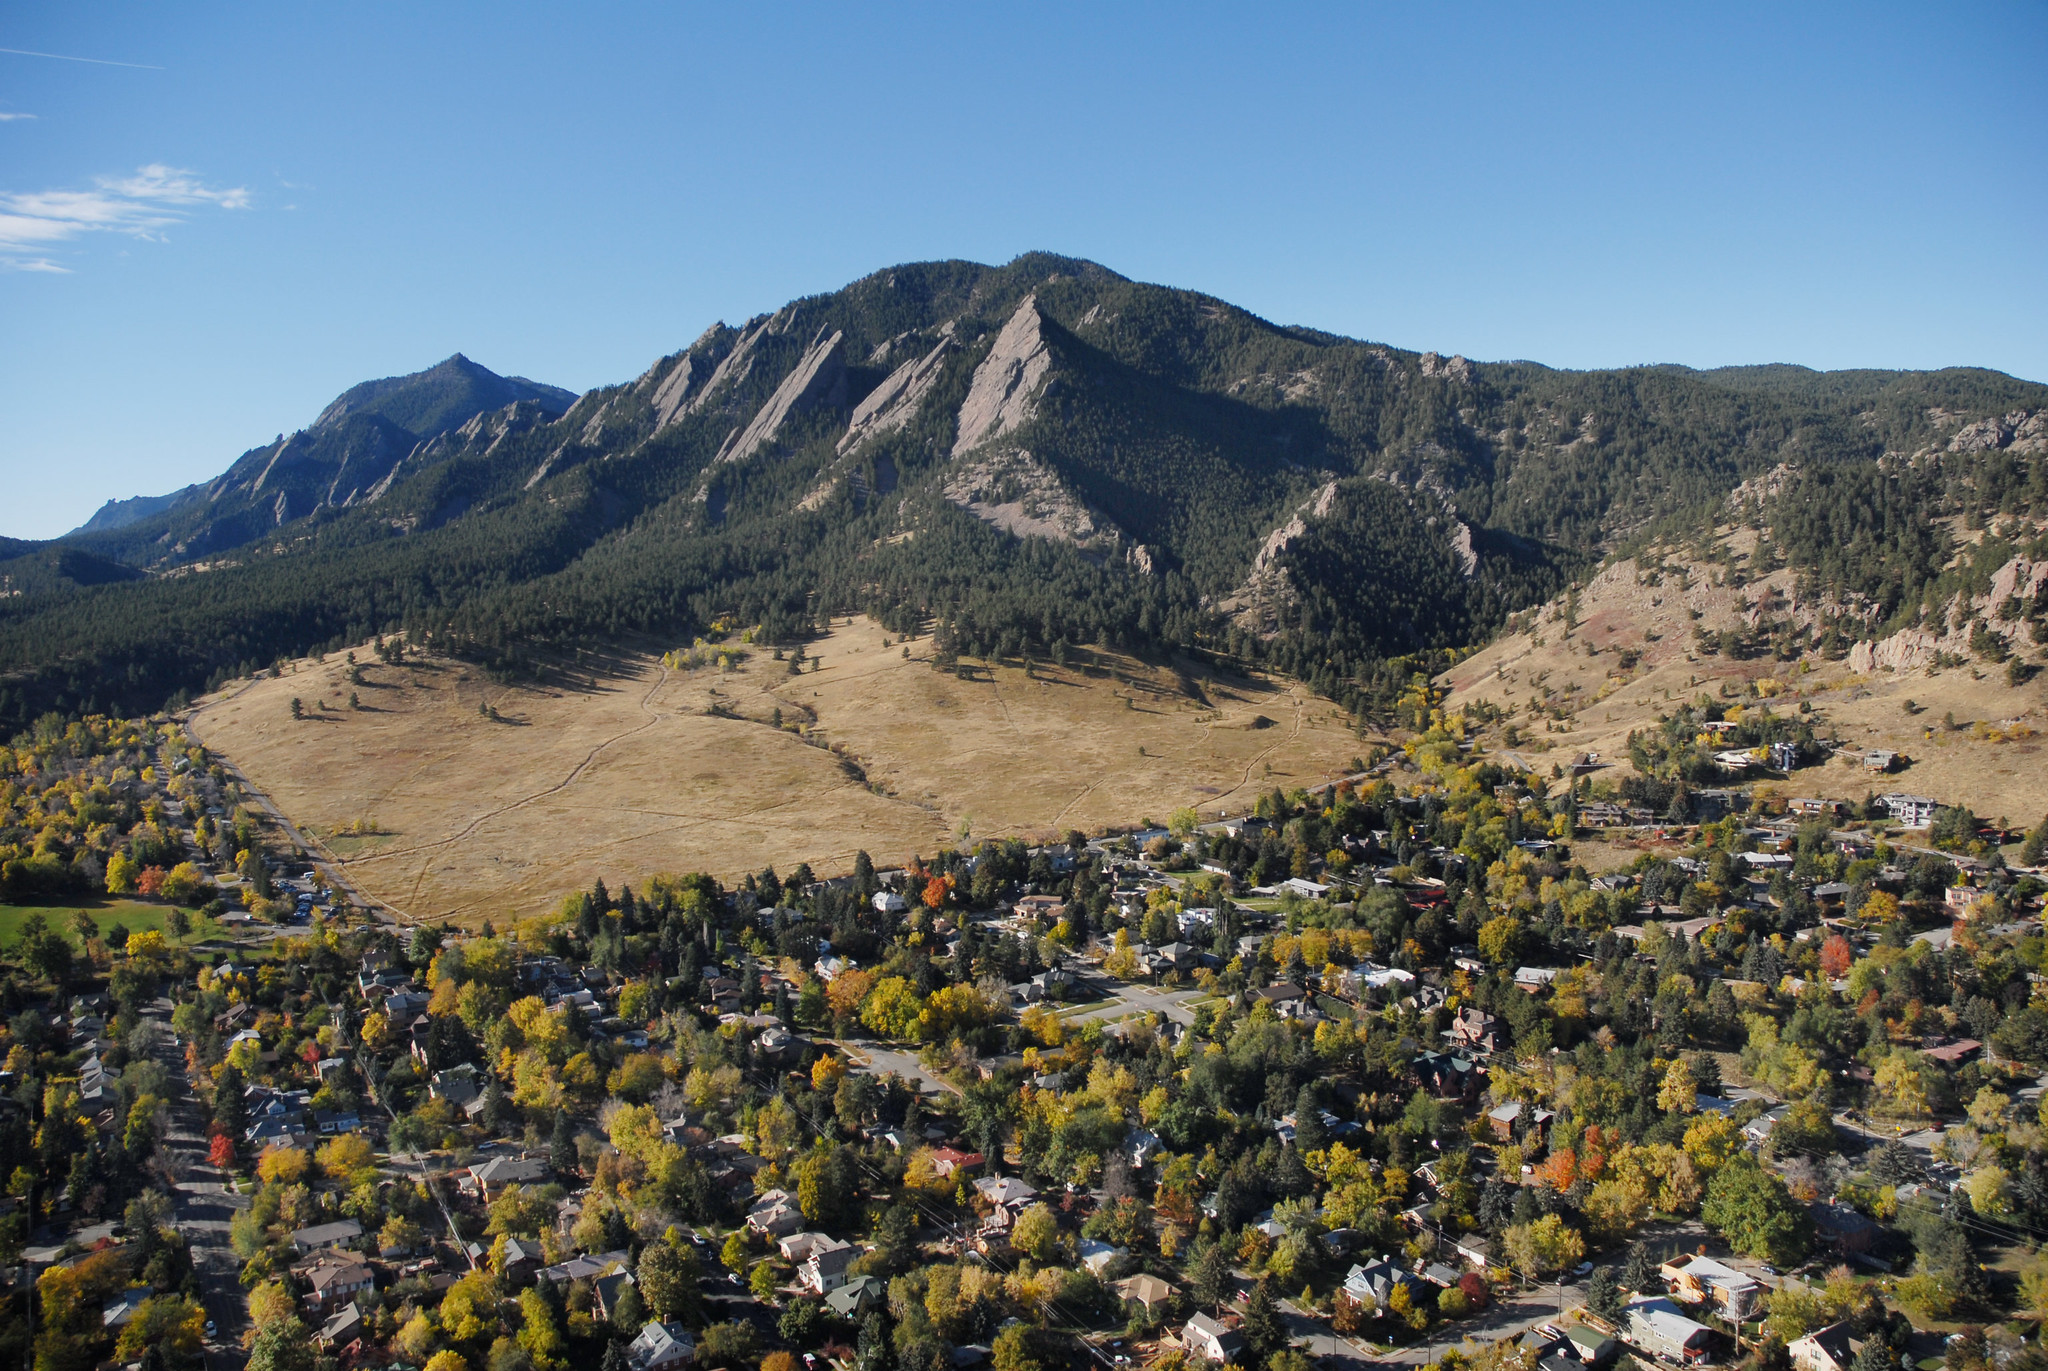 Want to edit Boulder’s planning bible? Now’s your chance.